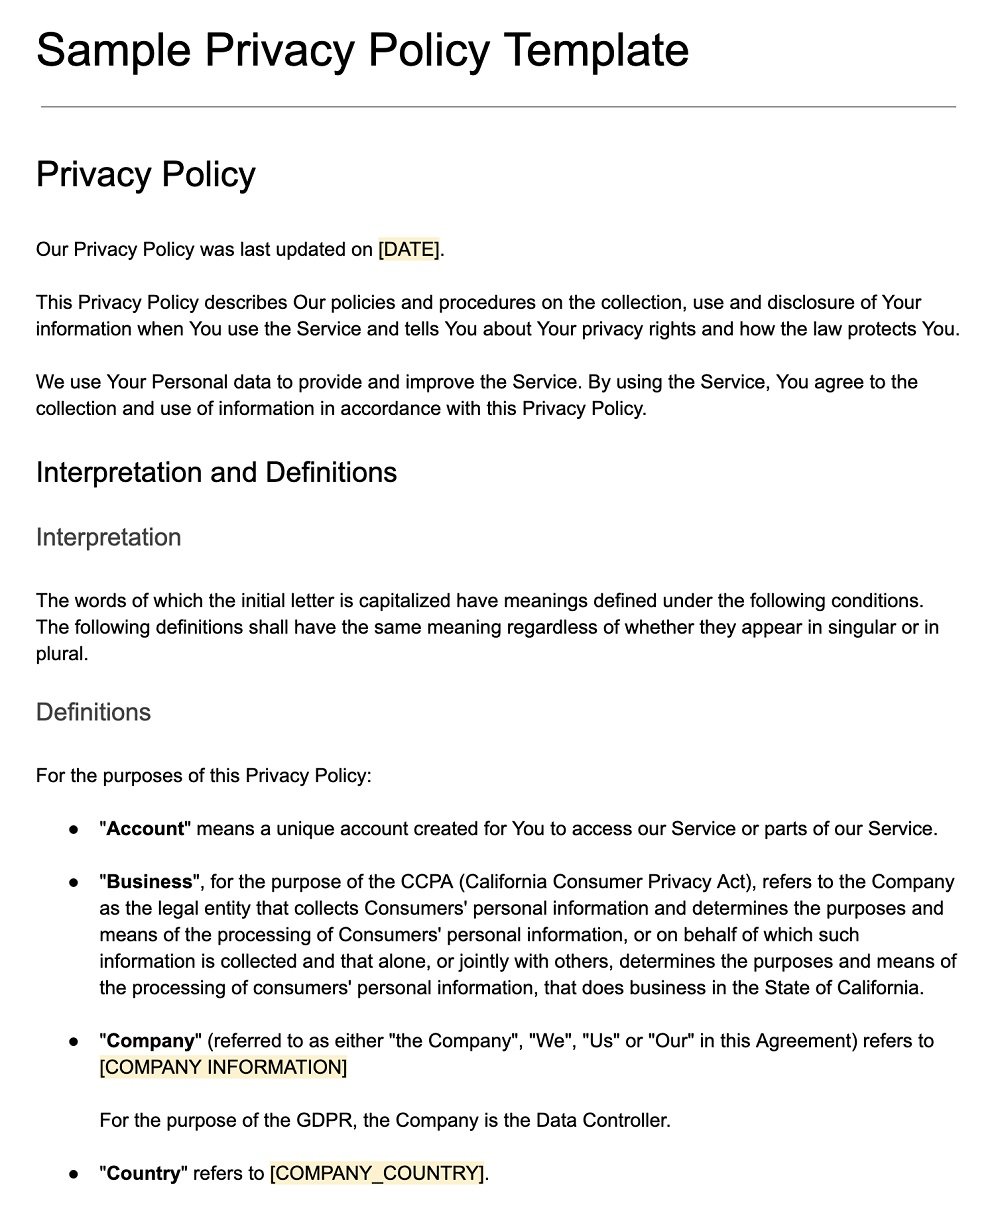 Screenshot of the Sample Privacy Policy Template